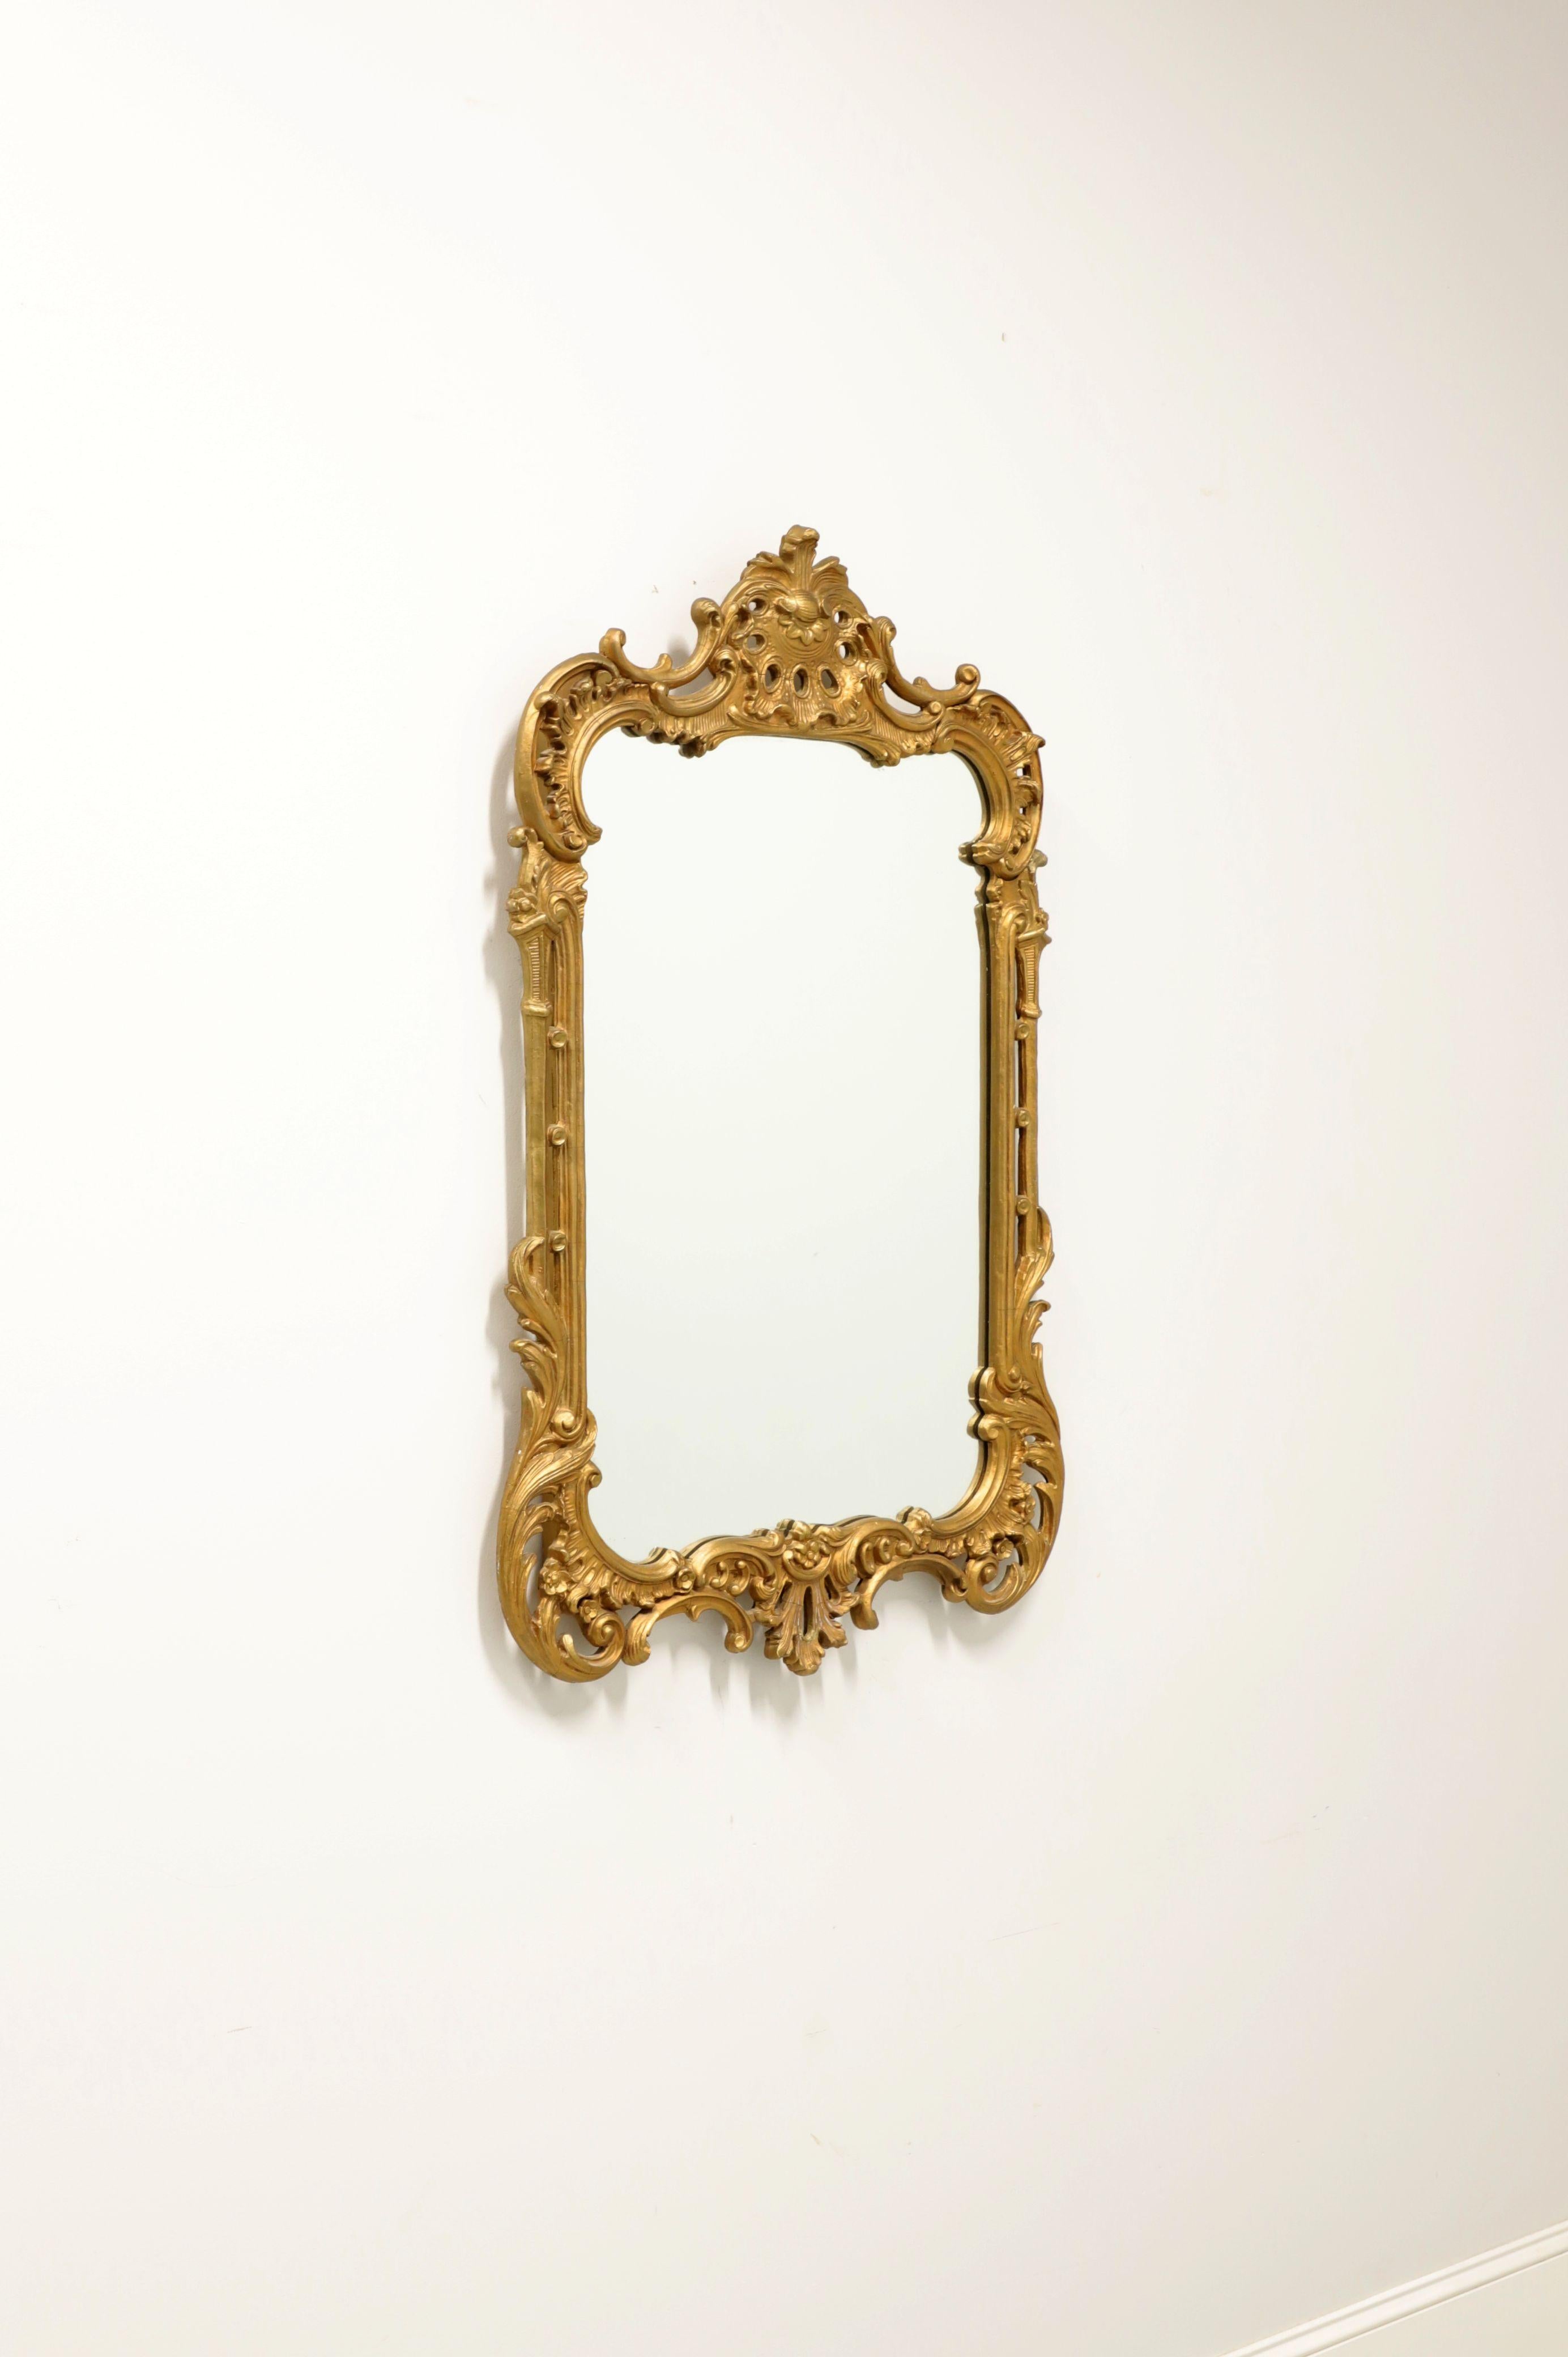 An antique Regency style wall mirror, unbranded. Mirrored glass in a wood frame painted gold. Features an ornately carved frame with a decorative motif. Possibly made in USA, in the late 19th Century.

Measures: 26.75W 1.5D 41.5H, Weighs